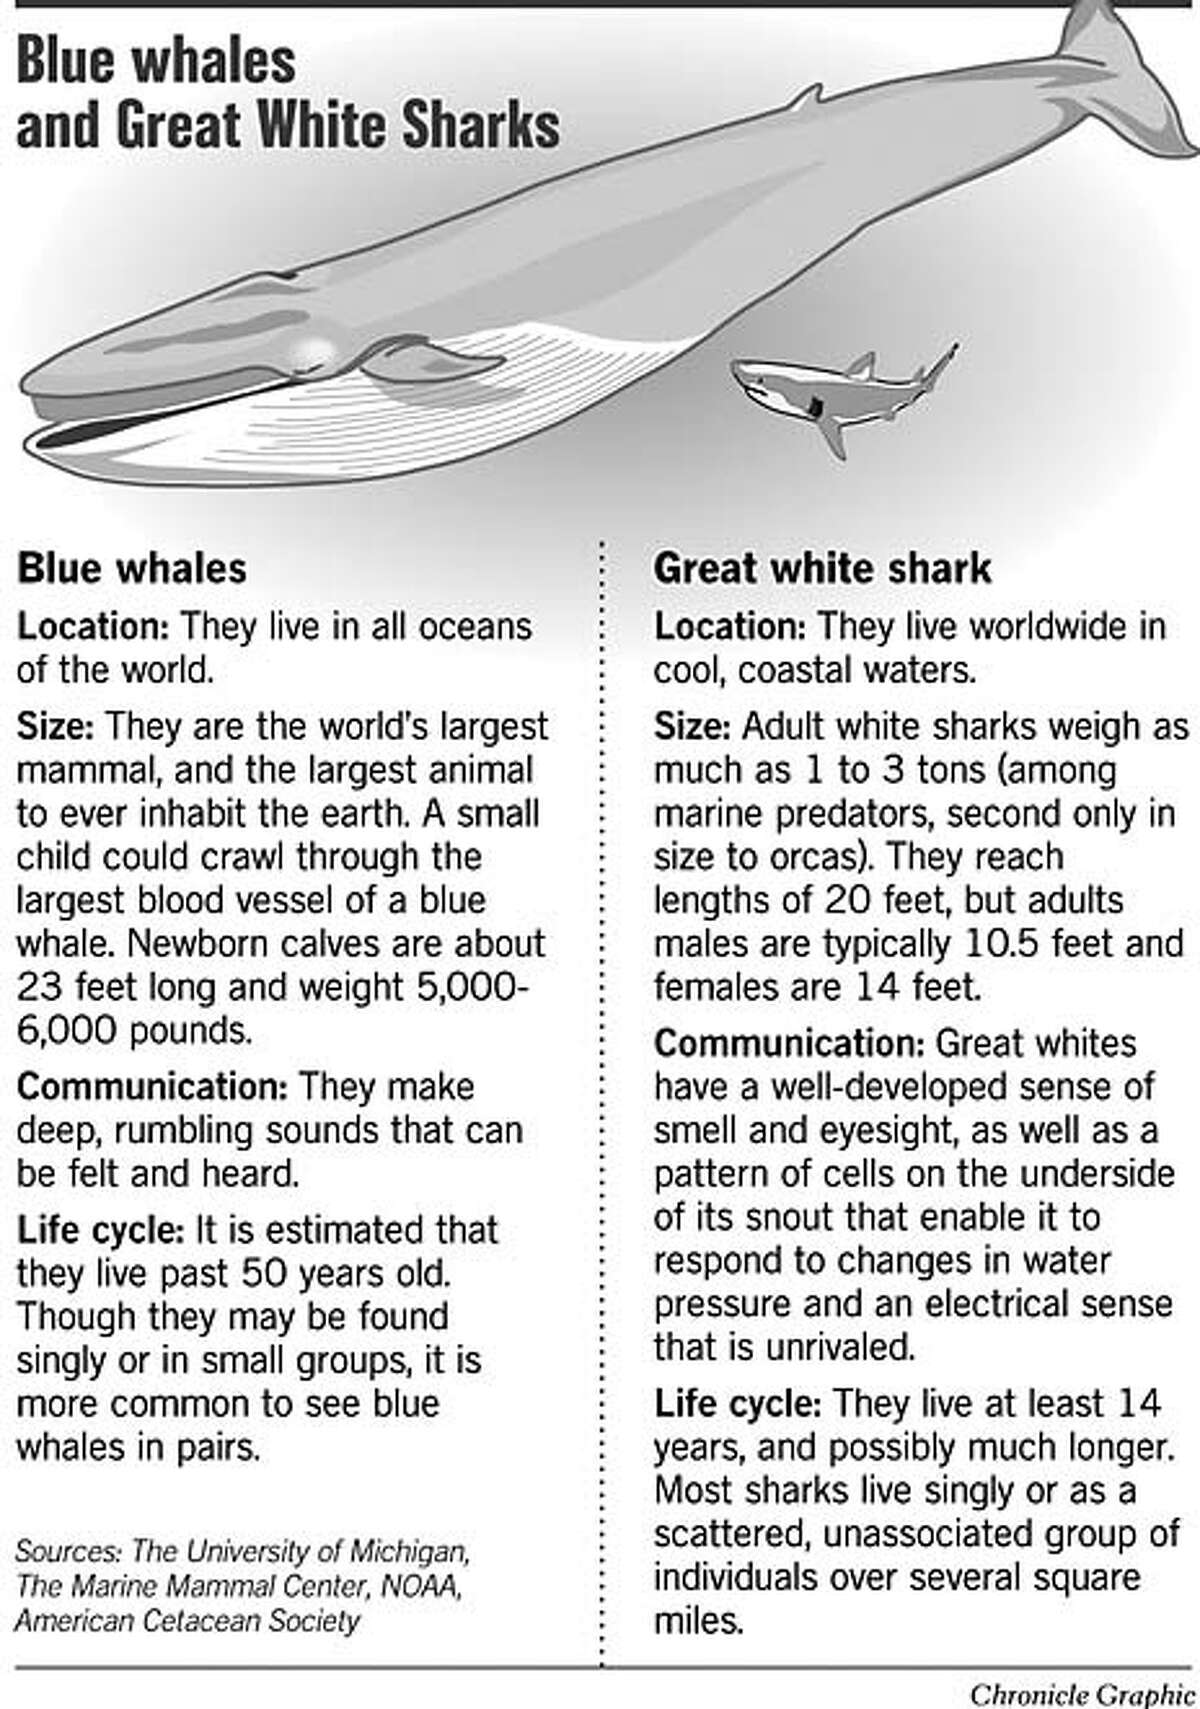 Blue Whales and Great White Sharks. Chronicle Graphic